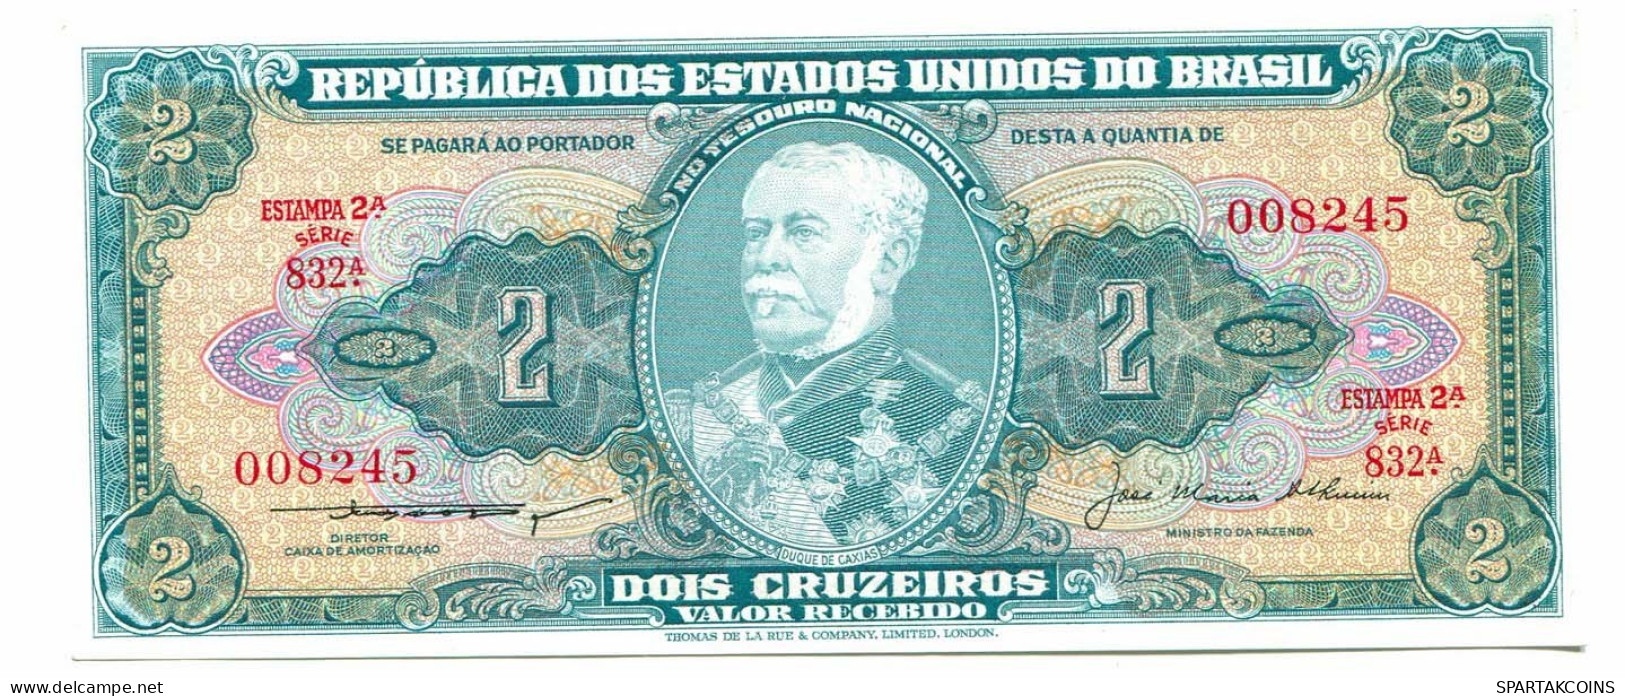 BRASIL 2 CRUZEIROS 1955 SERIE 832A UNC Paper Money Banknote #P10828.4 - [11] Local Banknote Issues